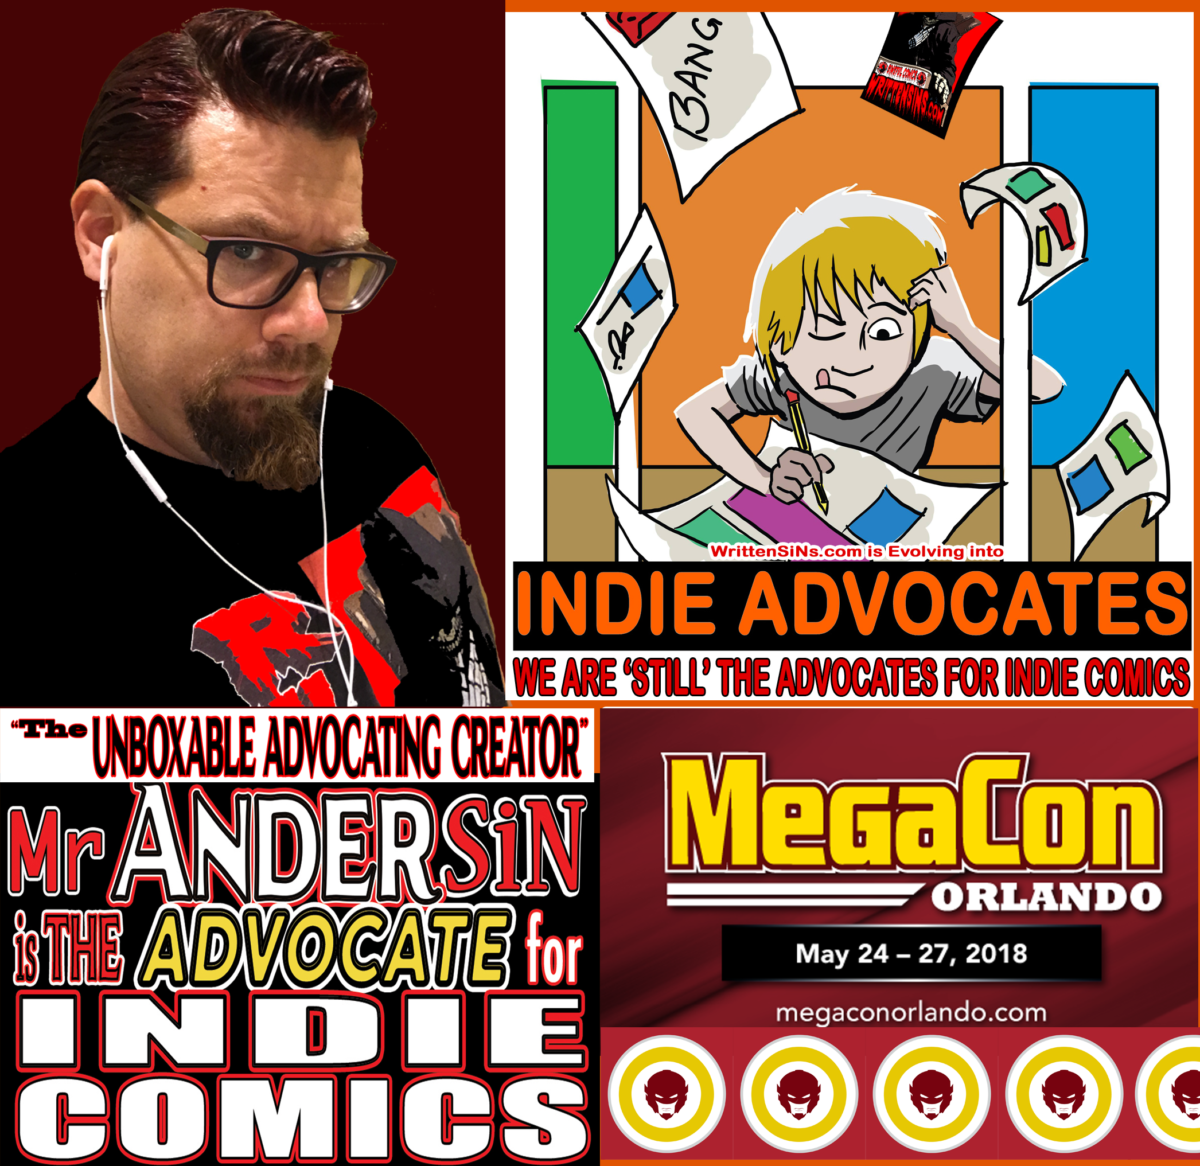 COMIC CON HIGHWAY EXITING with INDIE ADVOCATING  in FLORIDA::  MEGA CON ORLANDO May 24th-27th INDIE ADVOCATES and MR Andersin are gonna do some MEGA ADVOCATING  .